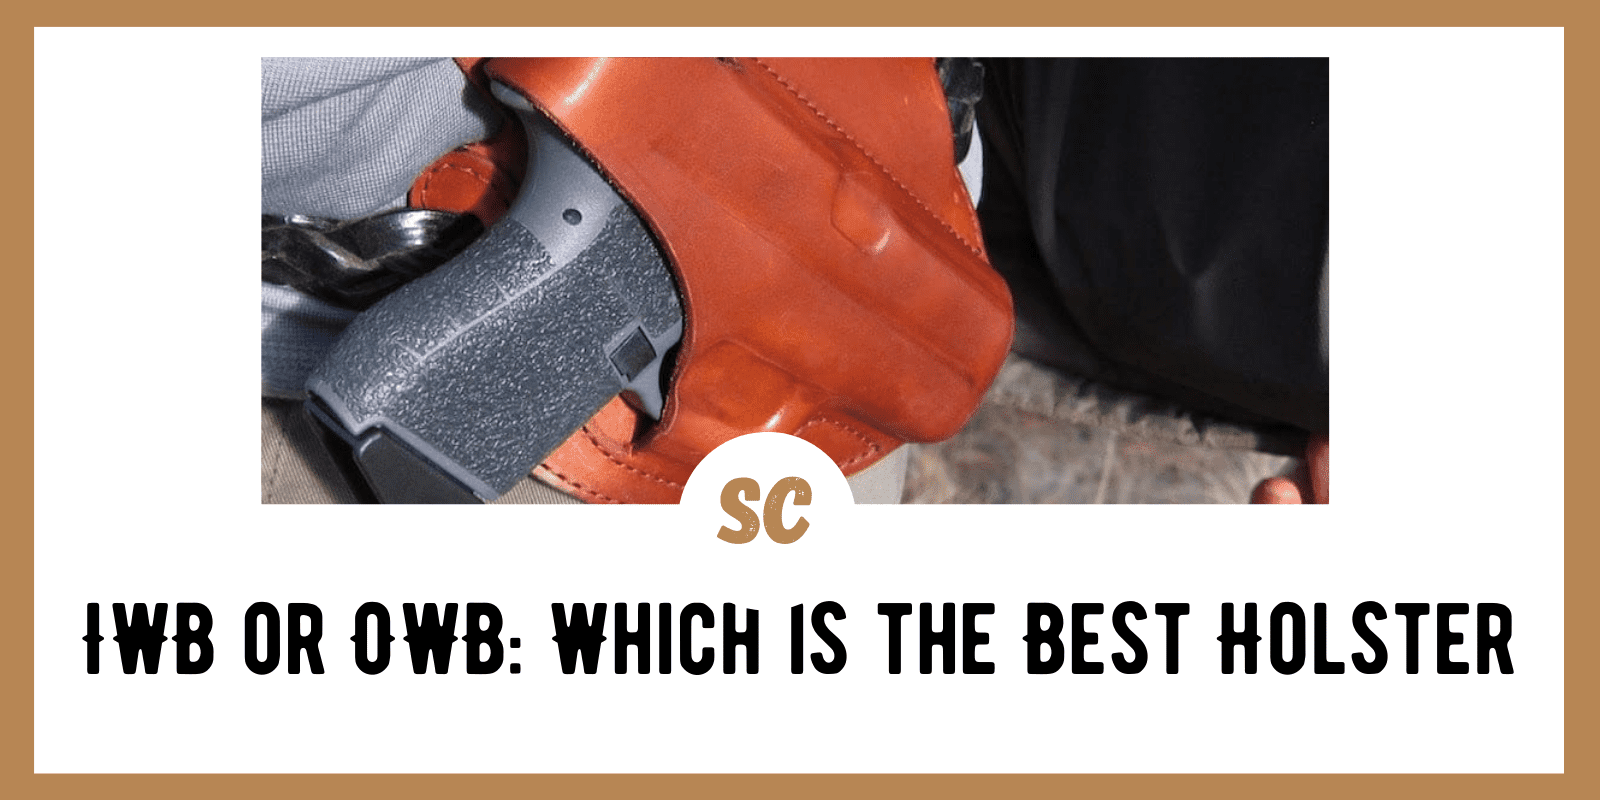 IWB or OWB: Which is the Best Holster For Concealed Carry?